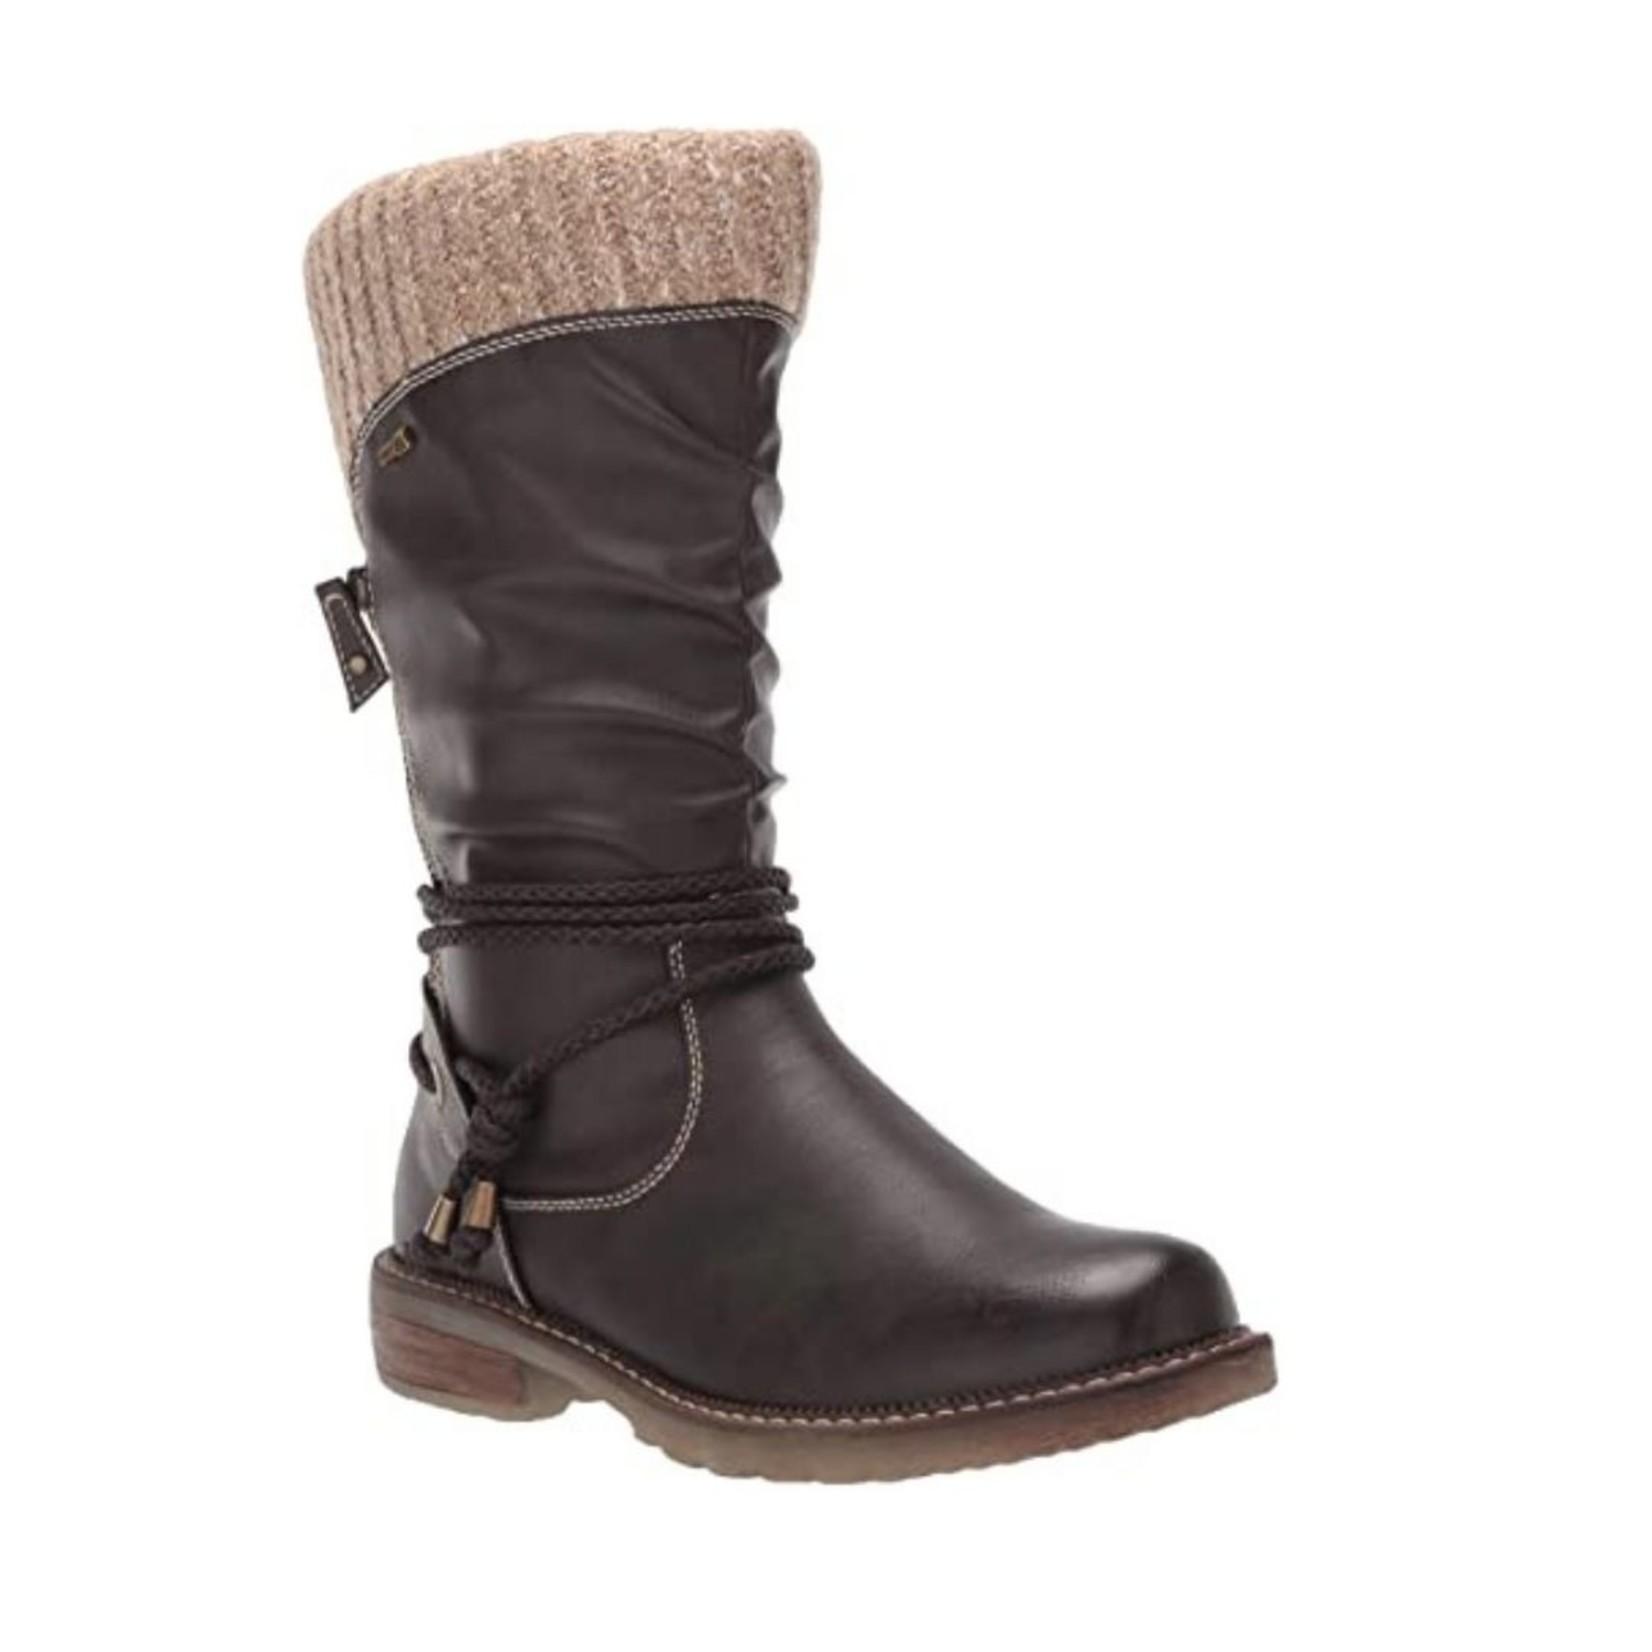 Spring Step Spring Step Acaphine Women's Fashion Boots